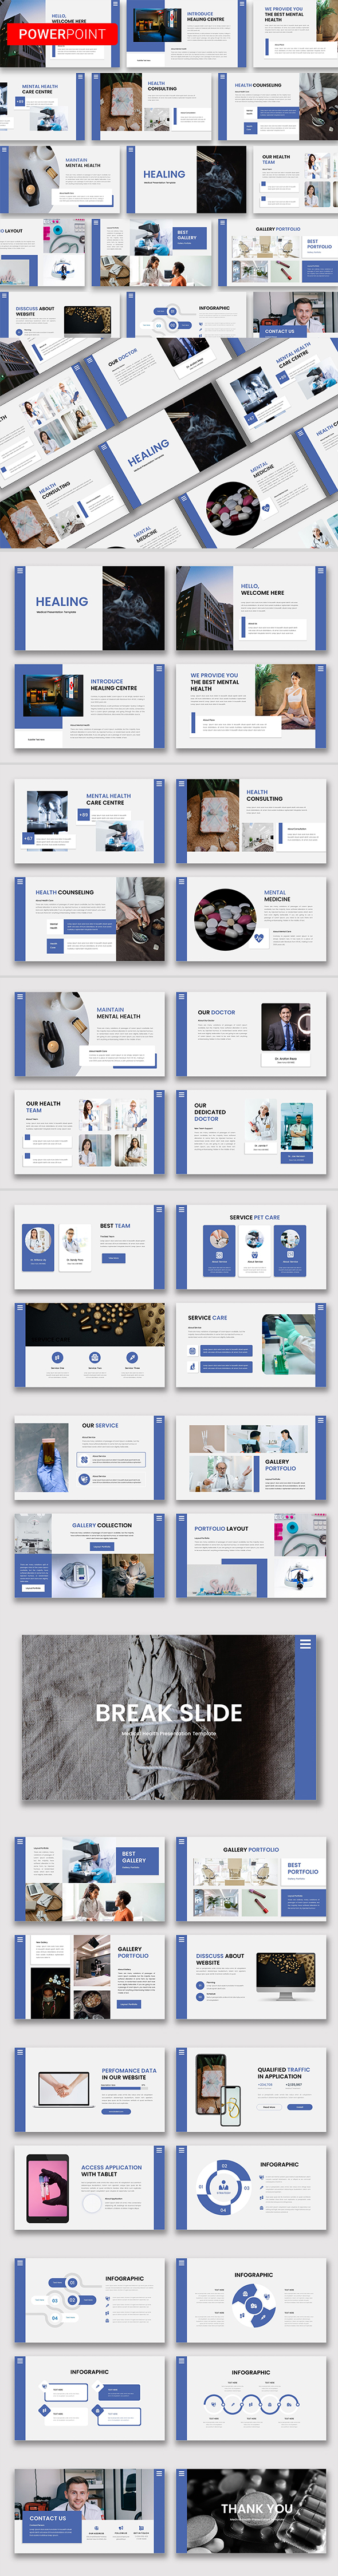 Healing-Medical Power Point Template